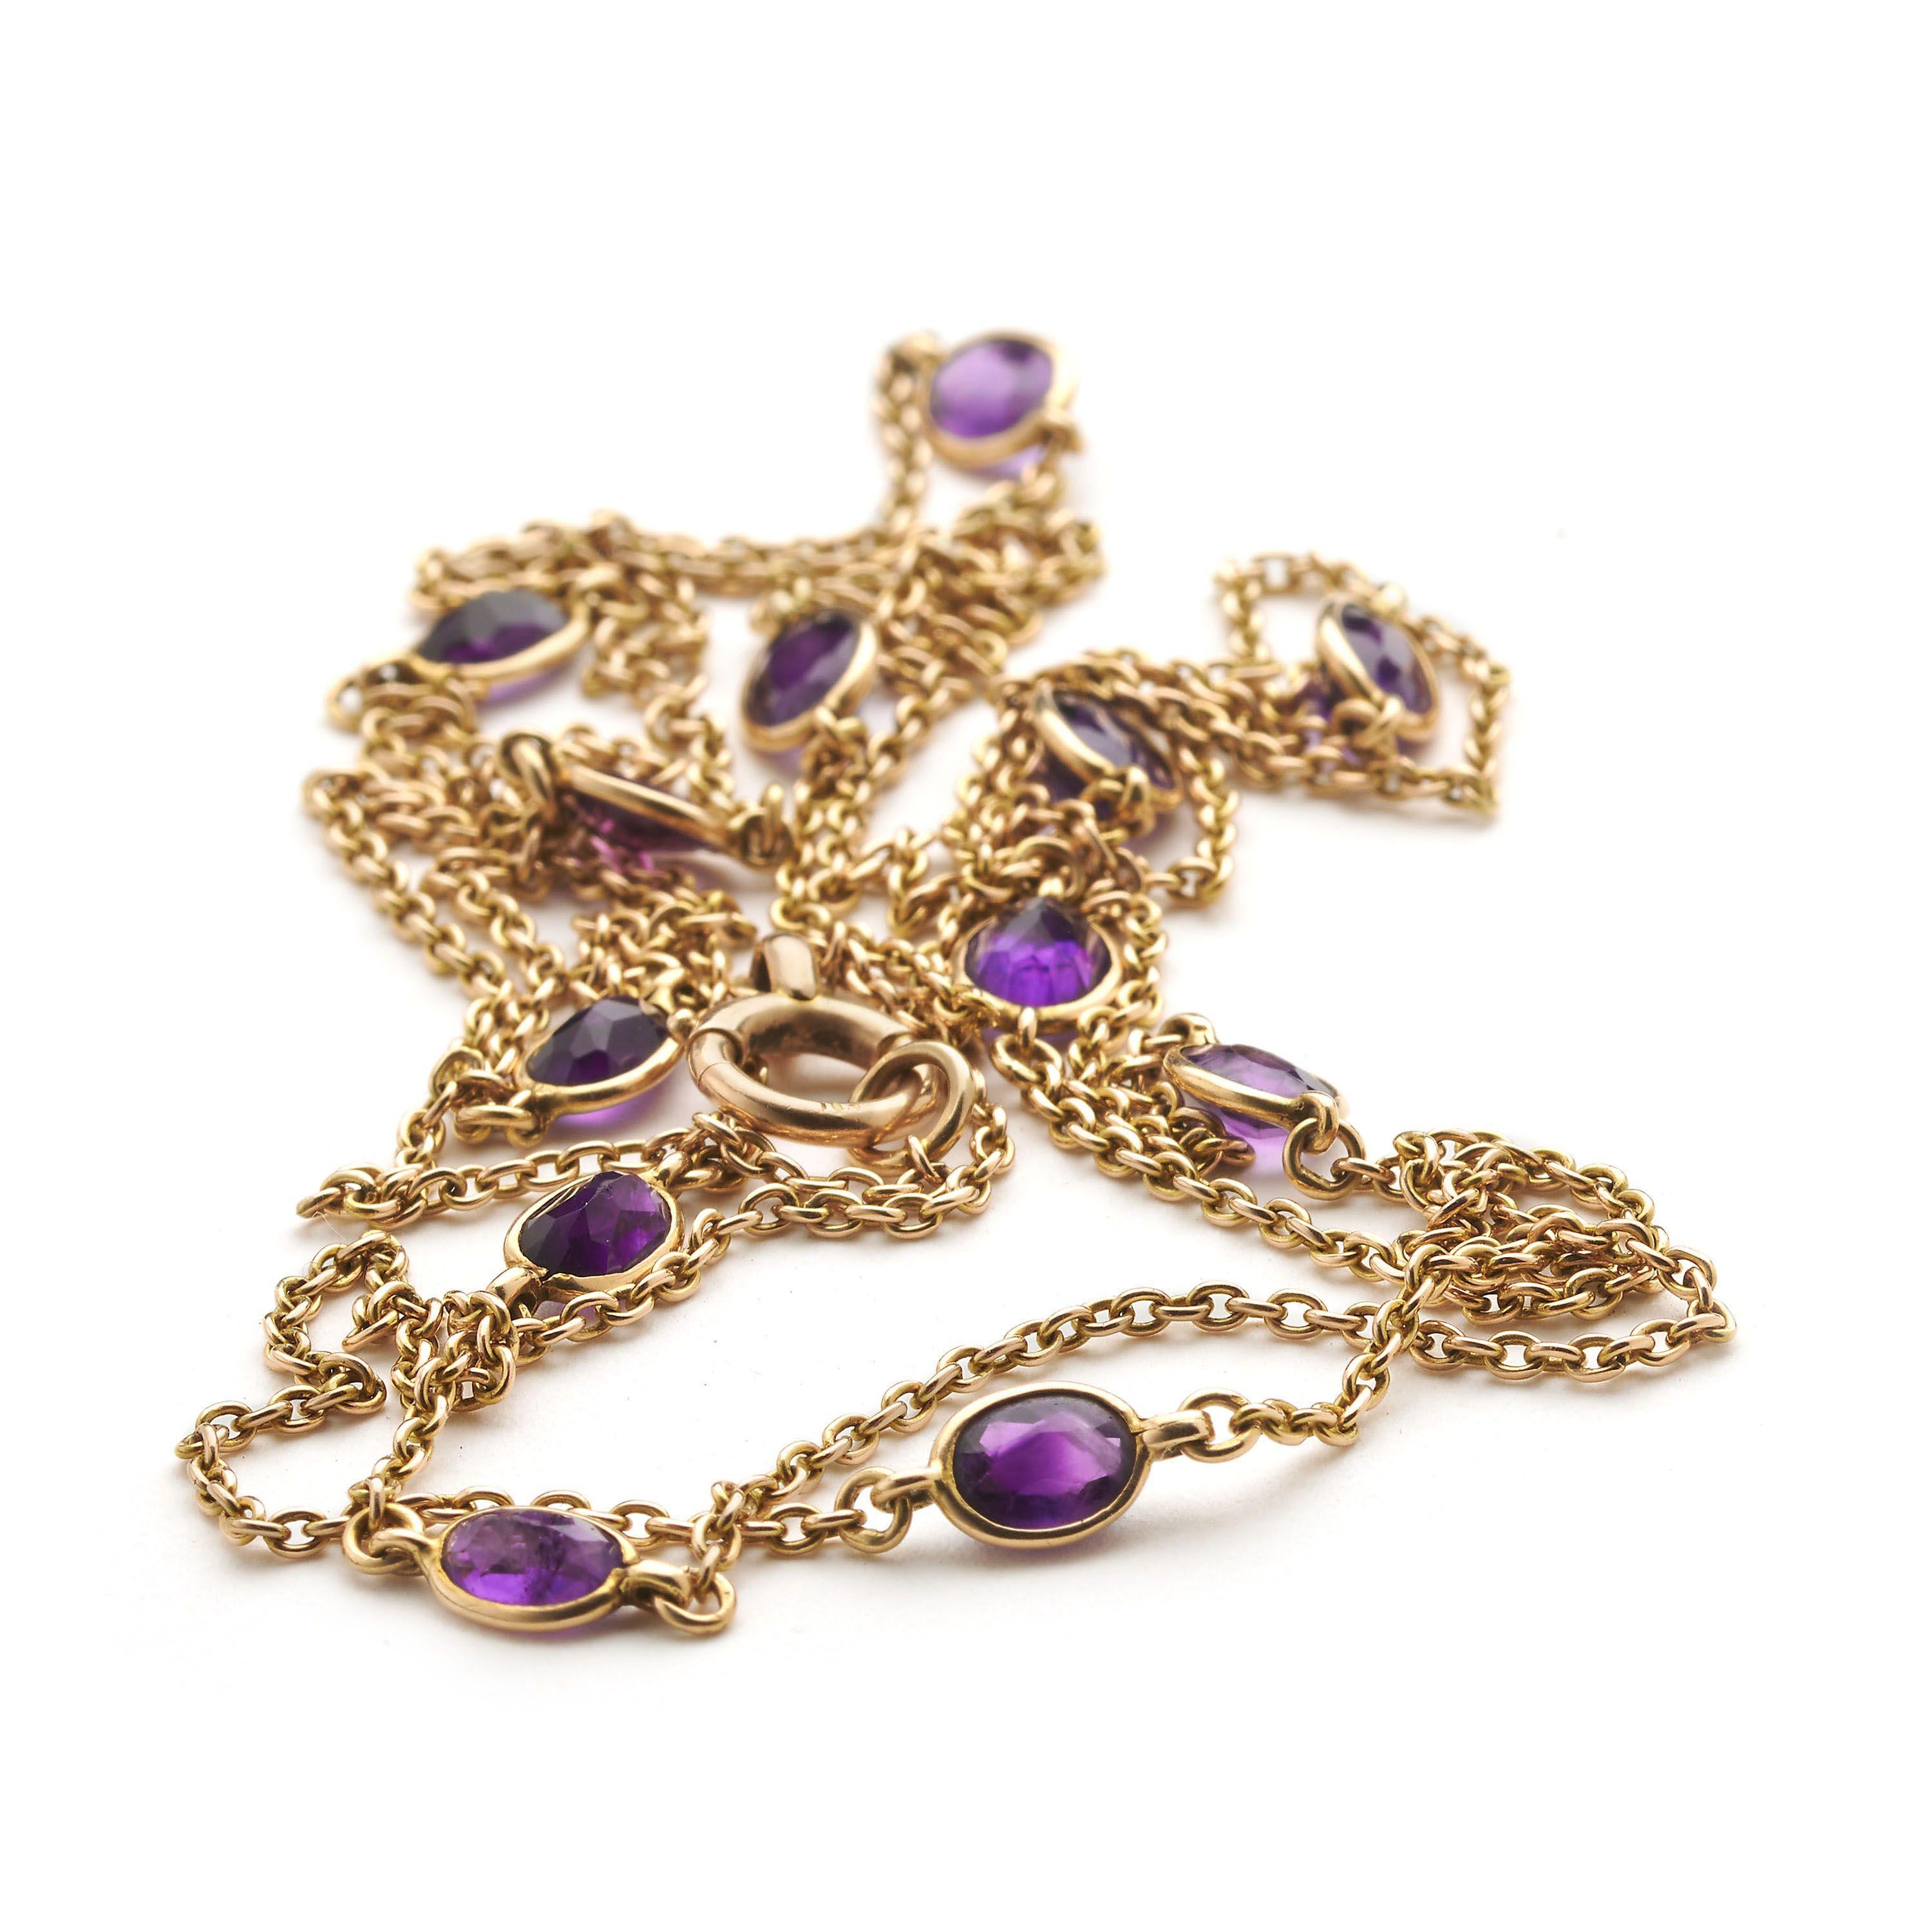 Antique Amethyst and Gold Long Chain Necklace, Circa 1920 In Good Condition For Sale In London, GB